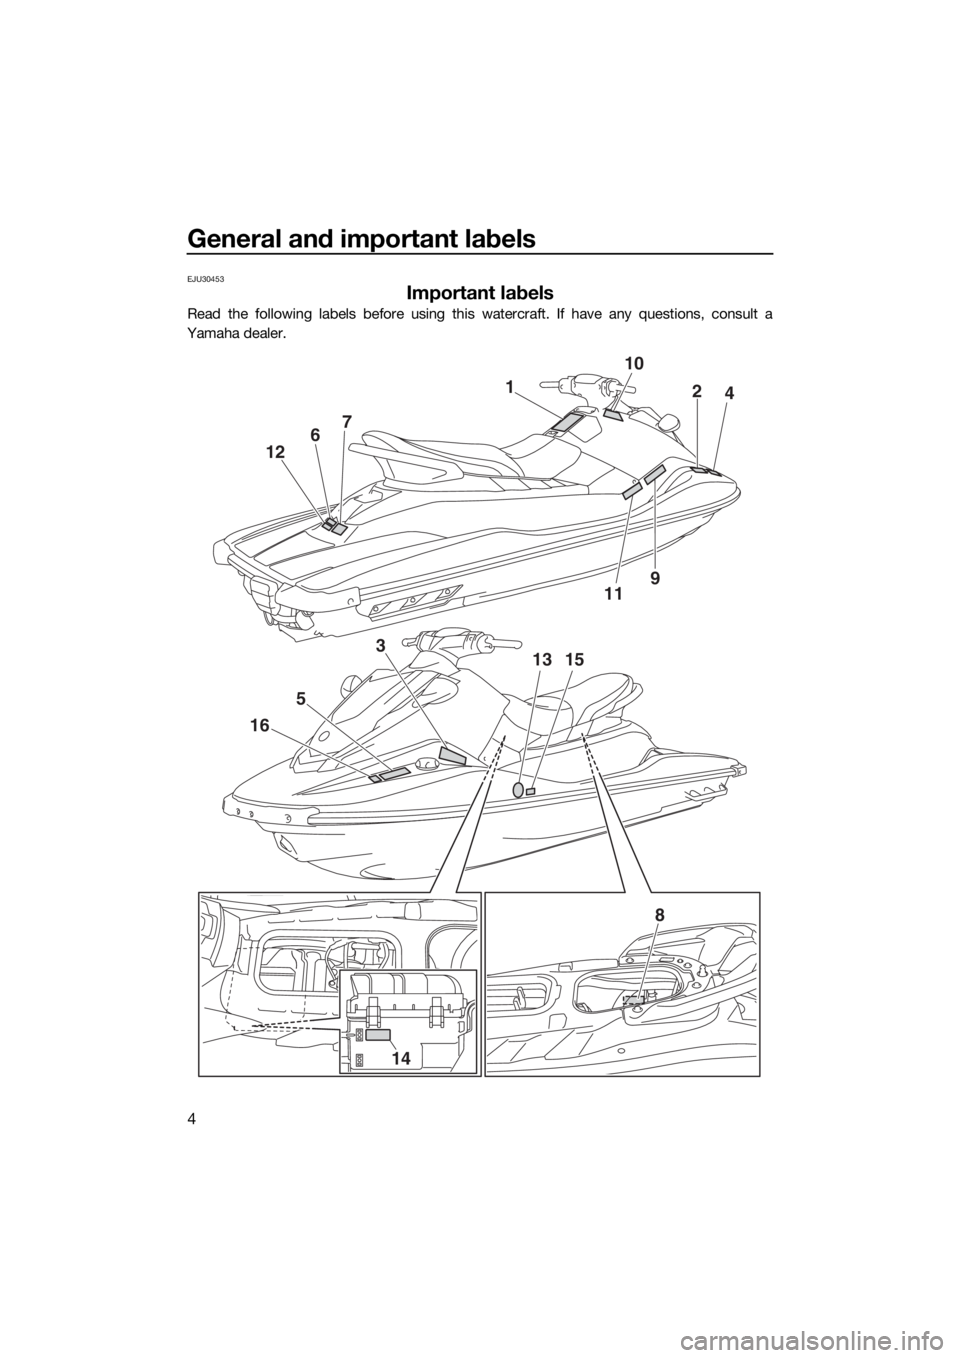 YAMAHA EX SPORT 2018  Owners Manual General and important labels
4
EJU30453
Important labels
Read the following labels before using this watercraft. If have any questions, consult a
Yamaha dealer.
110
2
4
119 12
5
163
13
15 7
6
14
8
UF3